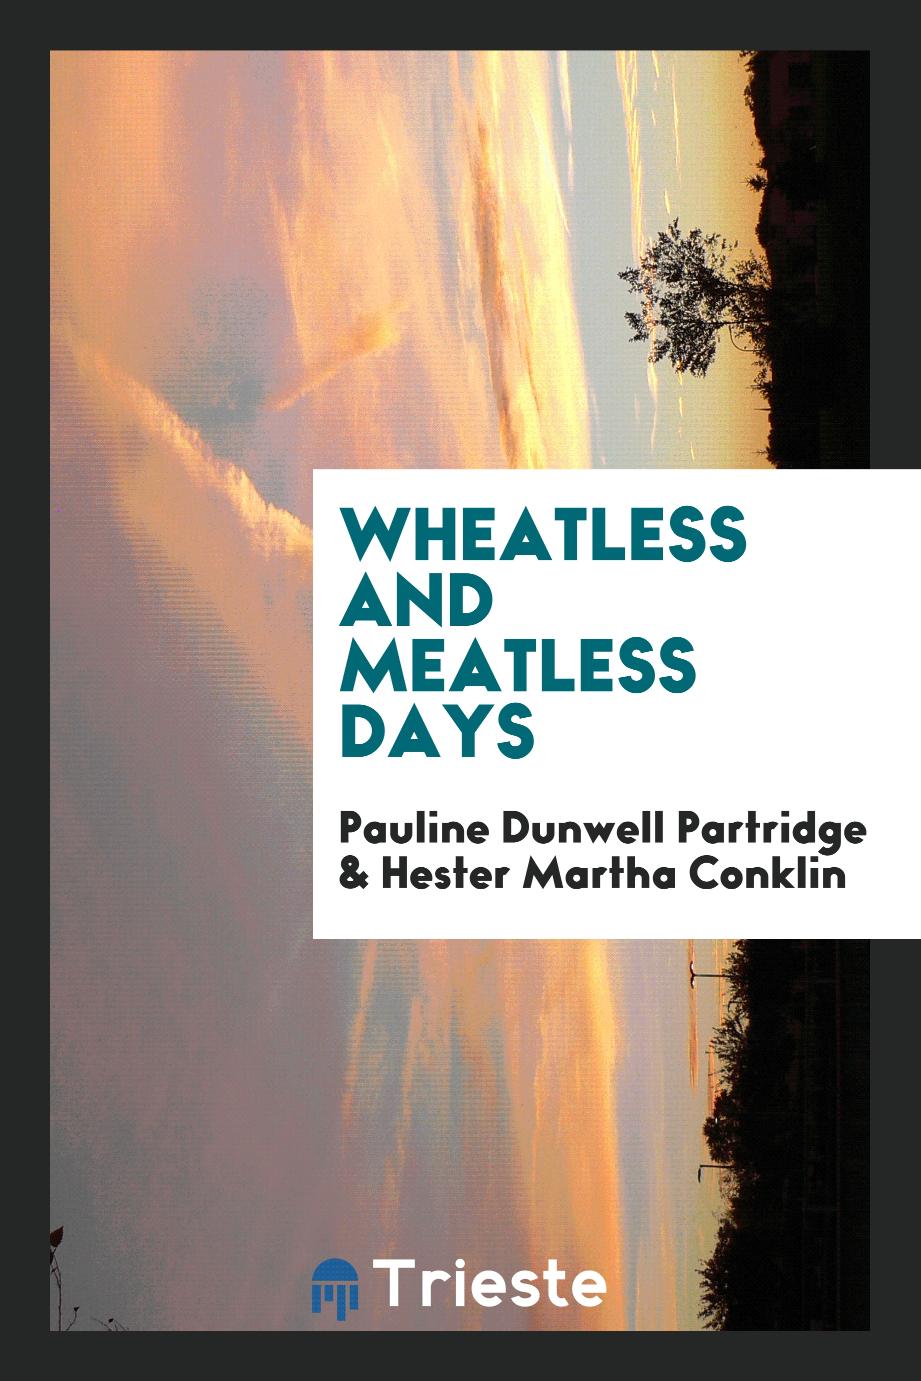 Wheatless and meatless days